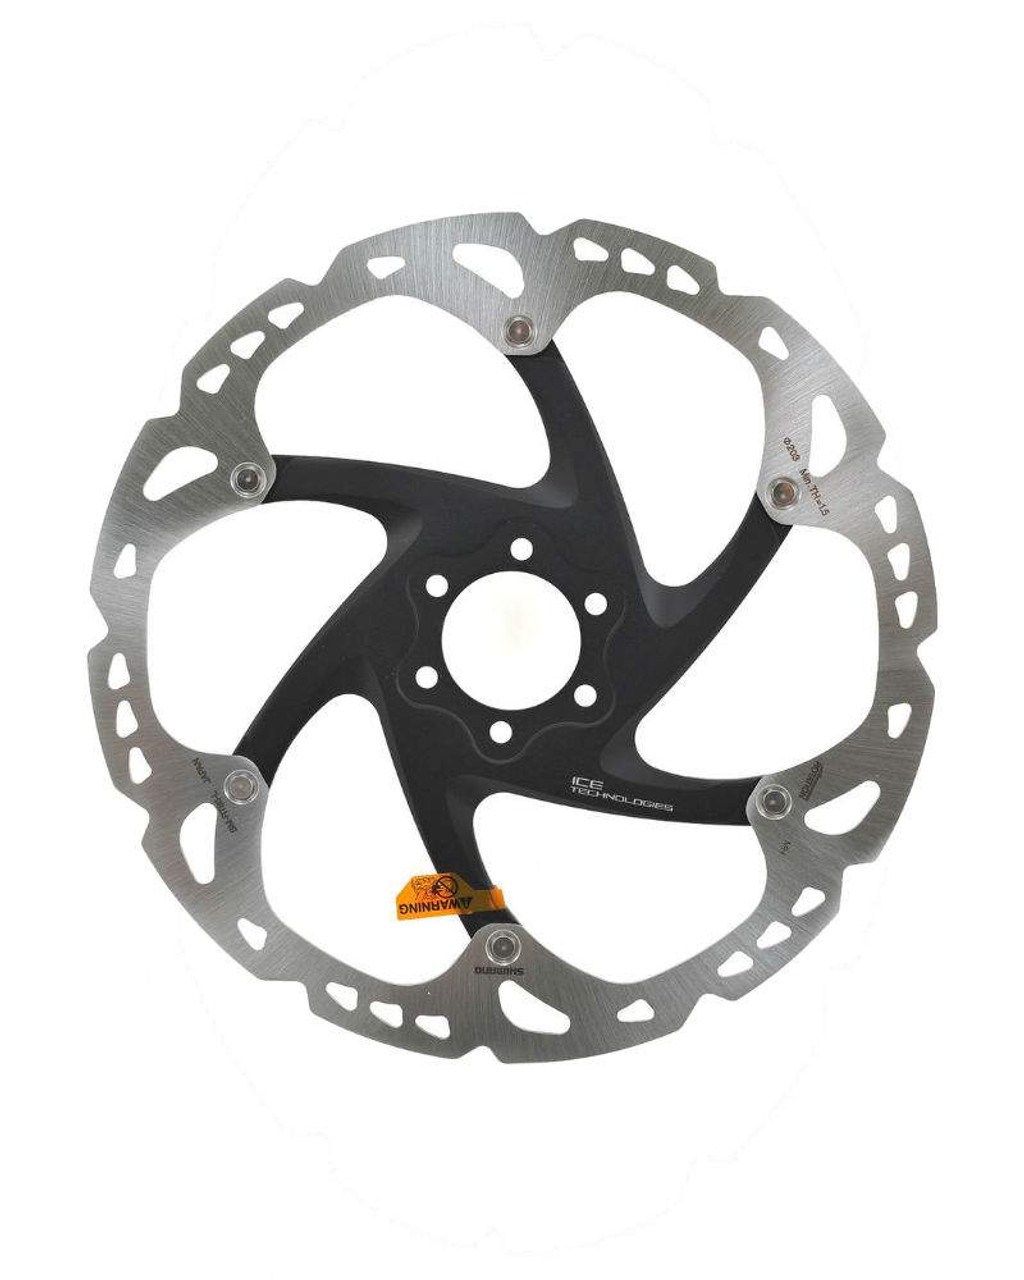 Aap Roest duurzame grondstof Shimano XT SM-RT86 Ice-Tech 6 Bolts Disc Brake Rotor | New Era Cycle